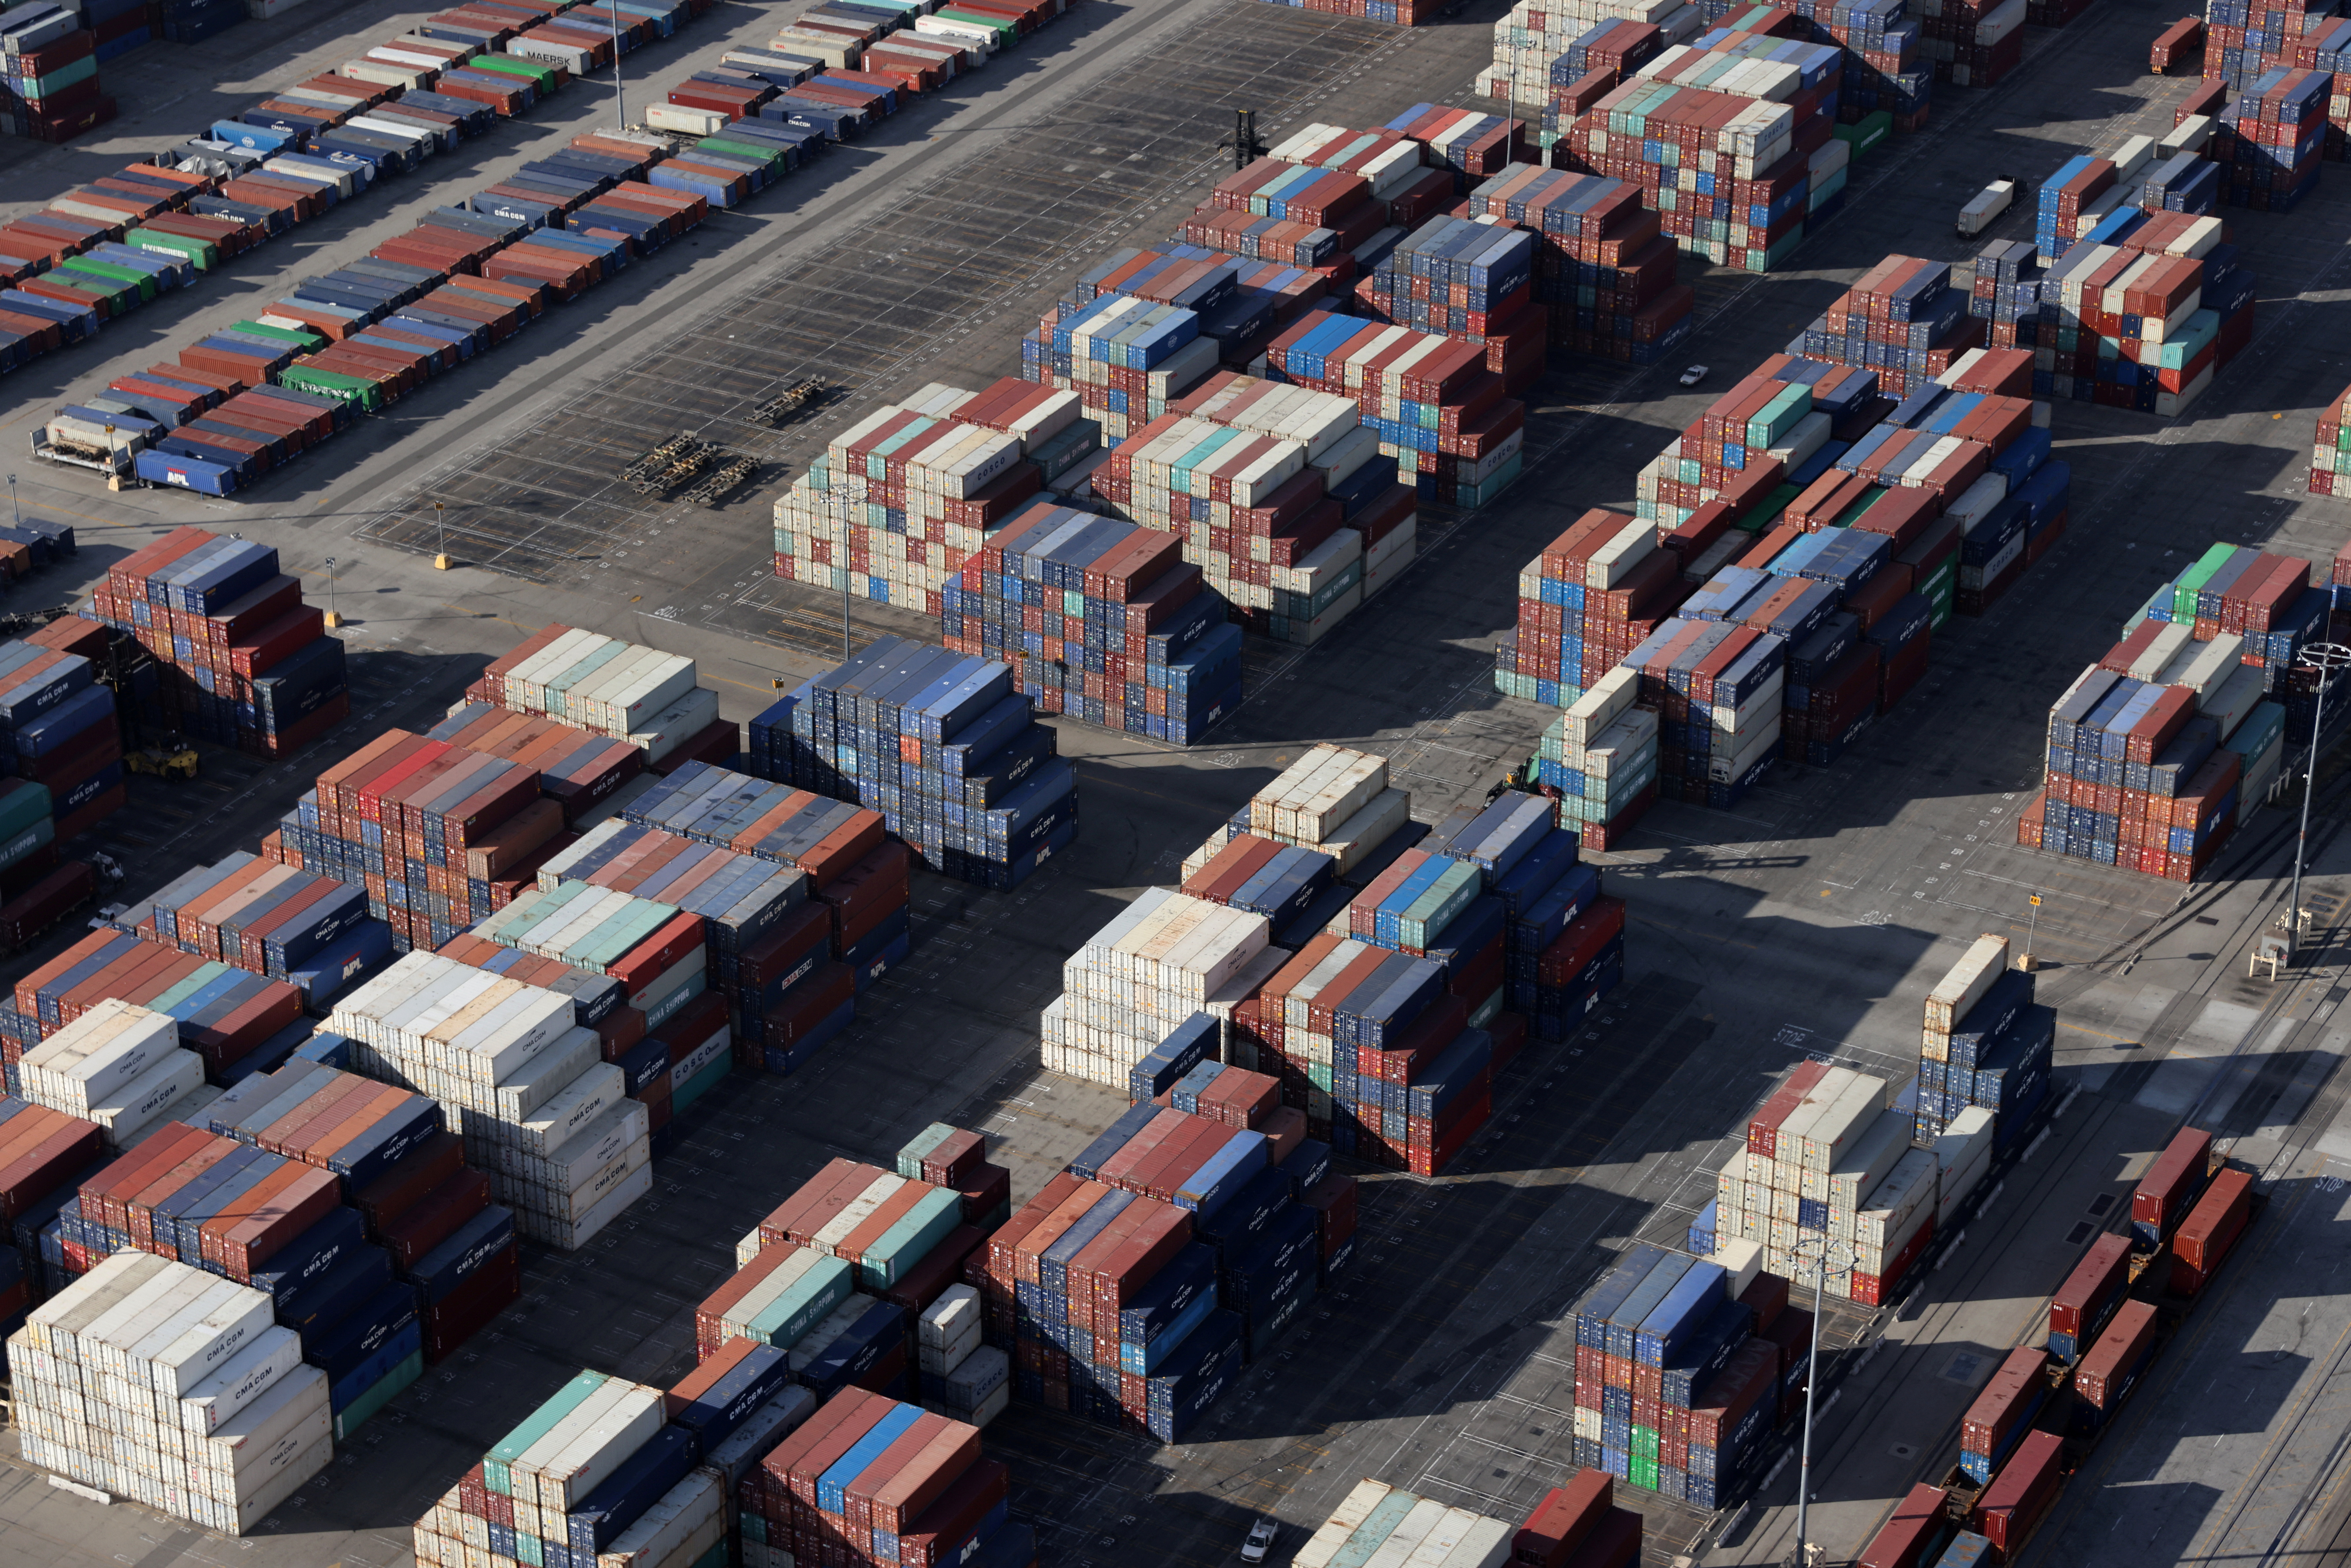 Shipping containers sit on the dock at a container terminal at the Port of Long Beach-Port of Los Angeles complex, amid the coronavirus disease (COVID-19) pandemic, in Los Angeles